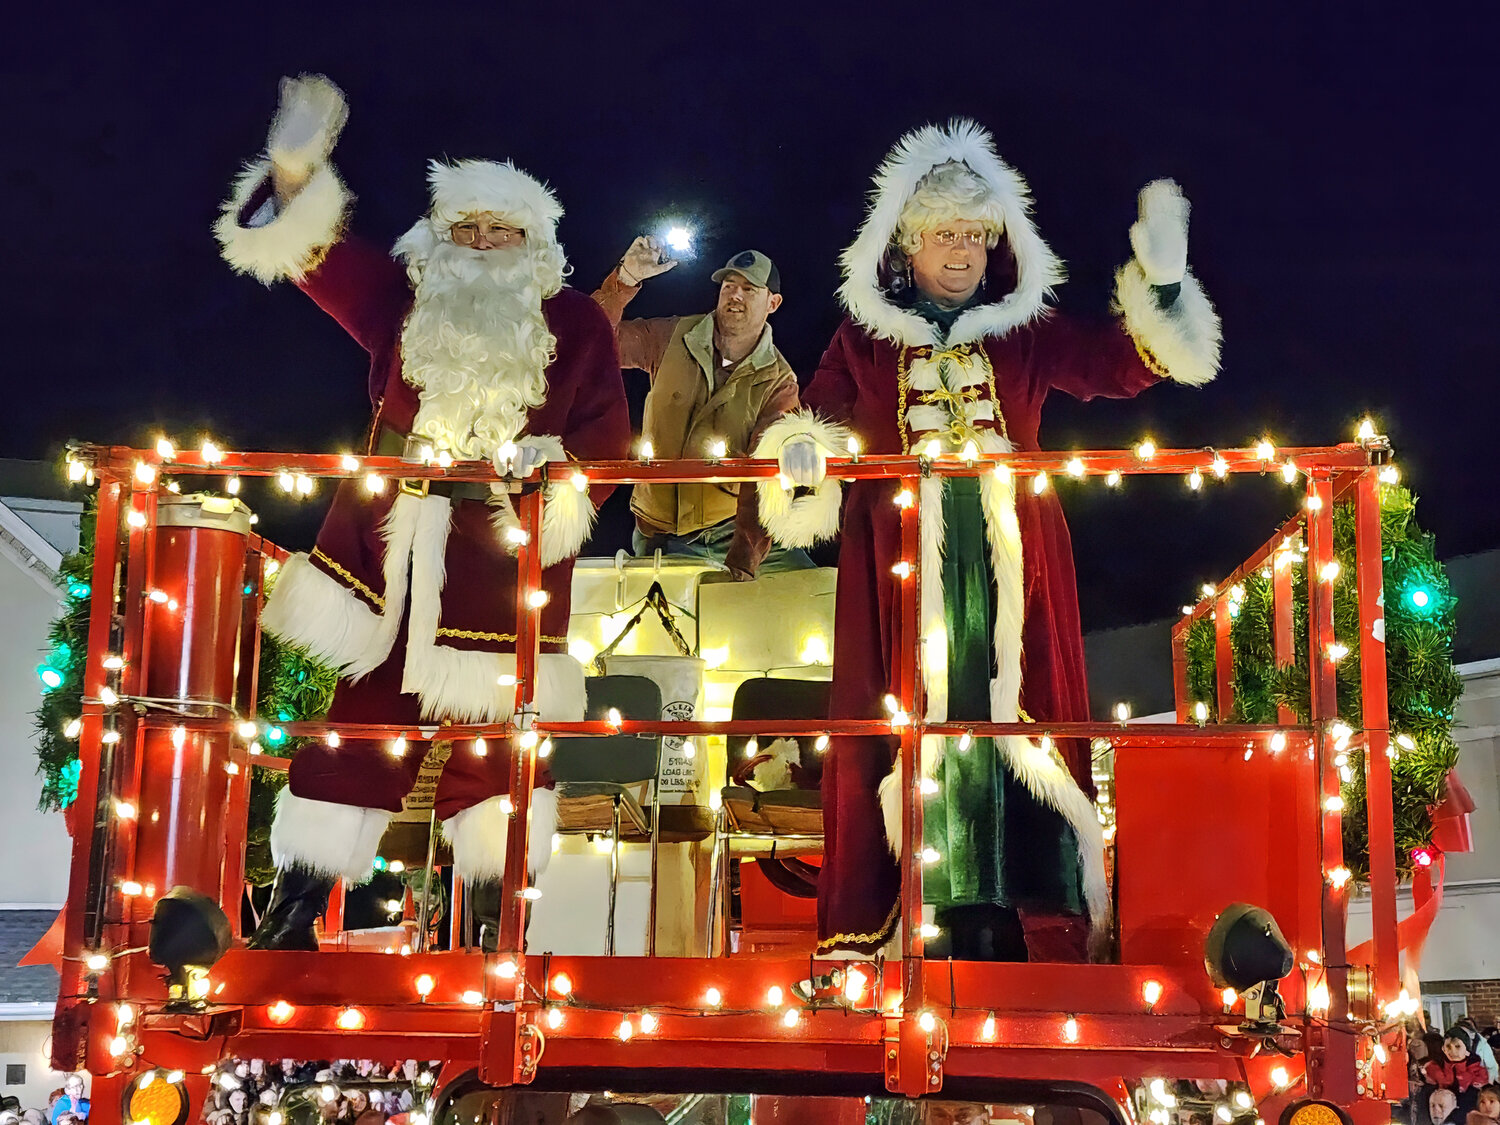 Santa and Mrs. Claus roll into Perkasie on a decorated fire truck.